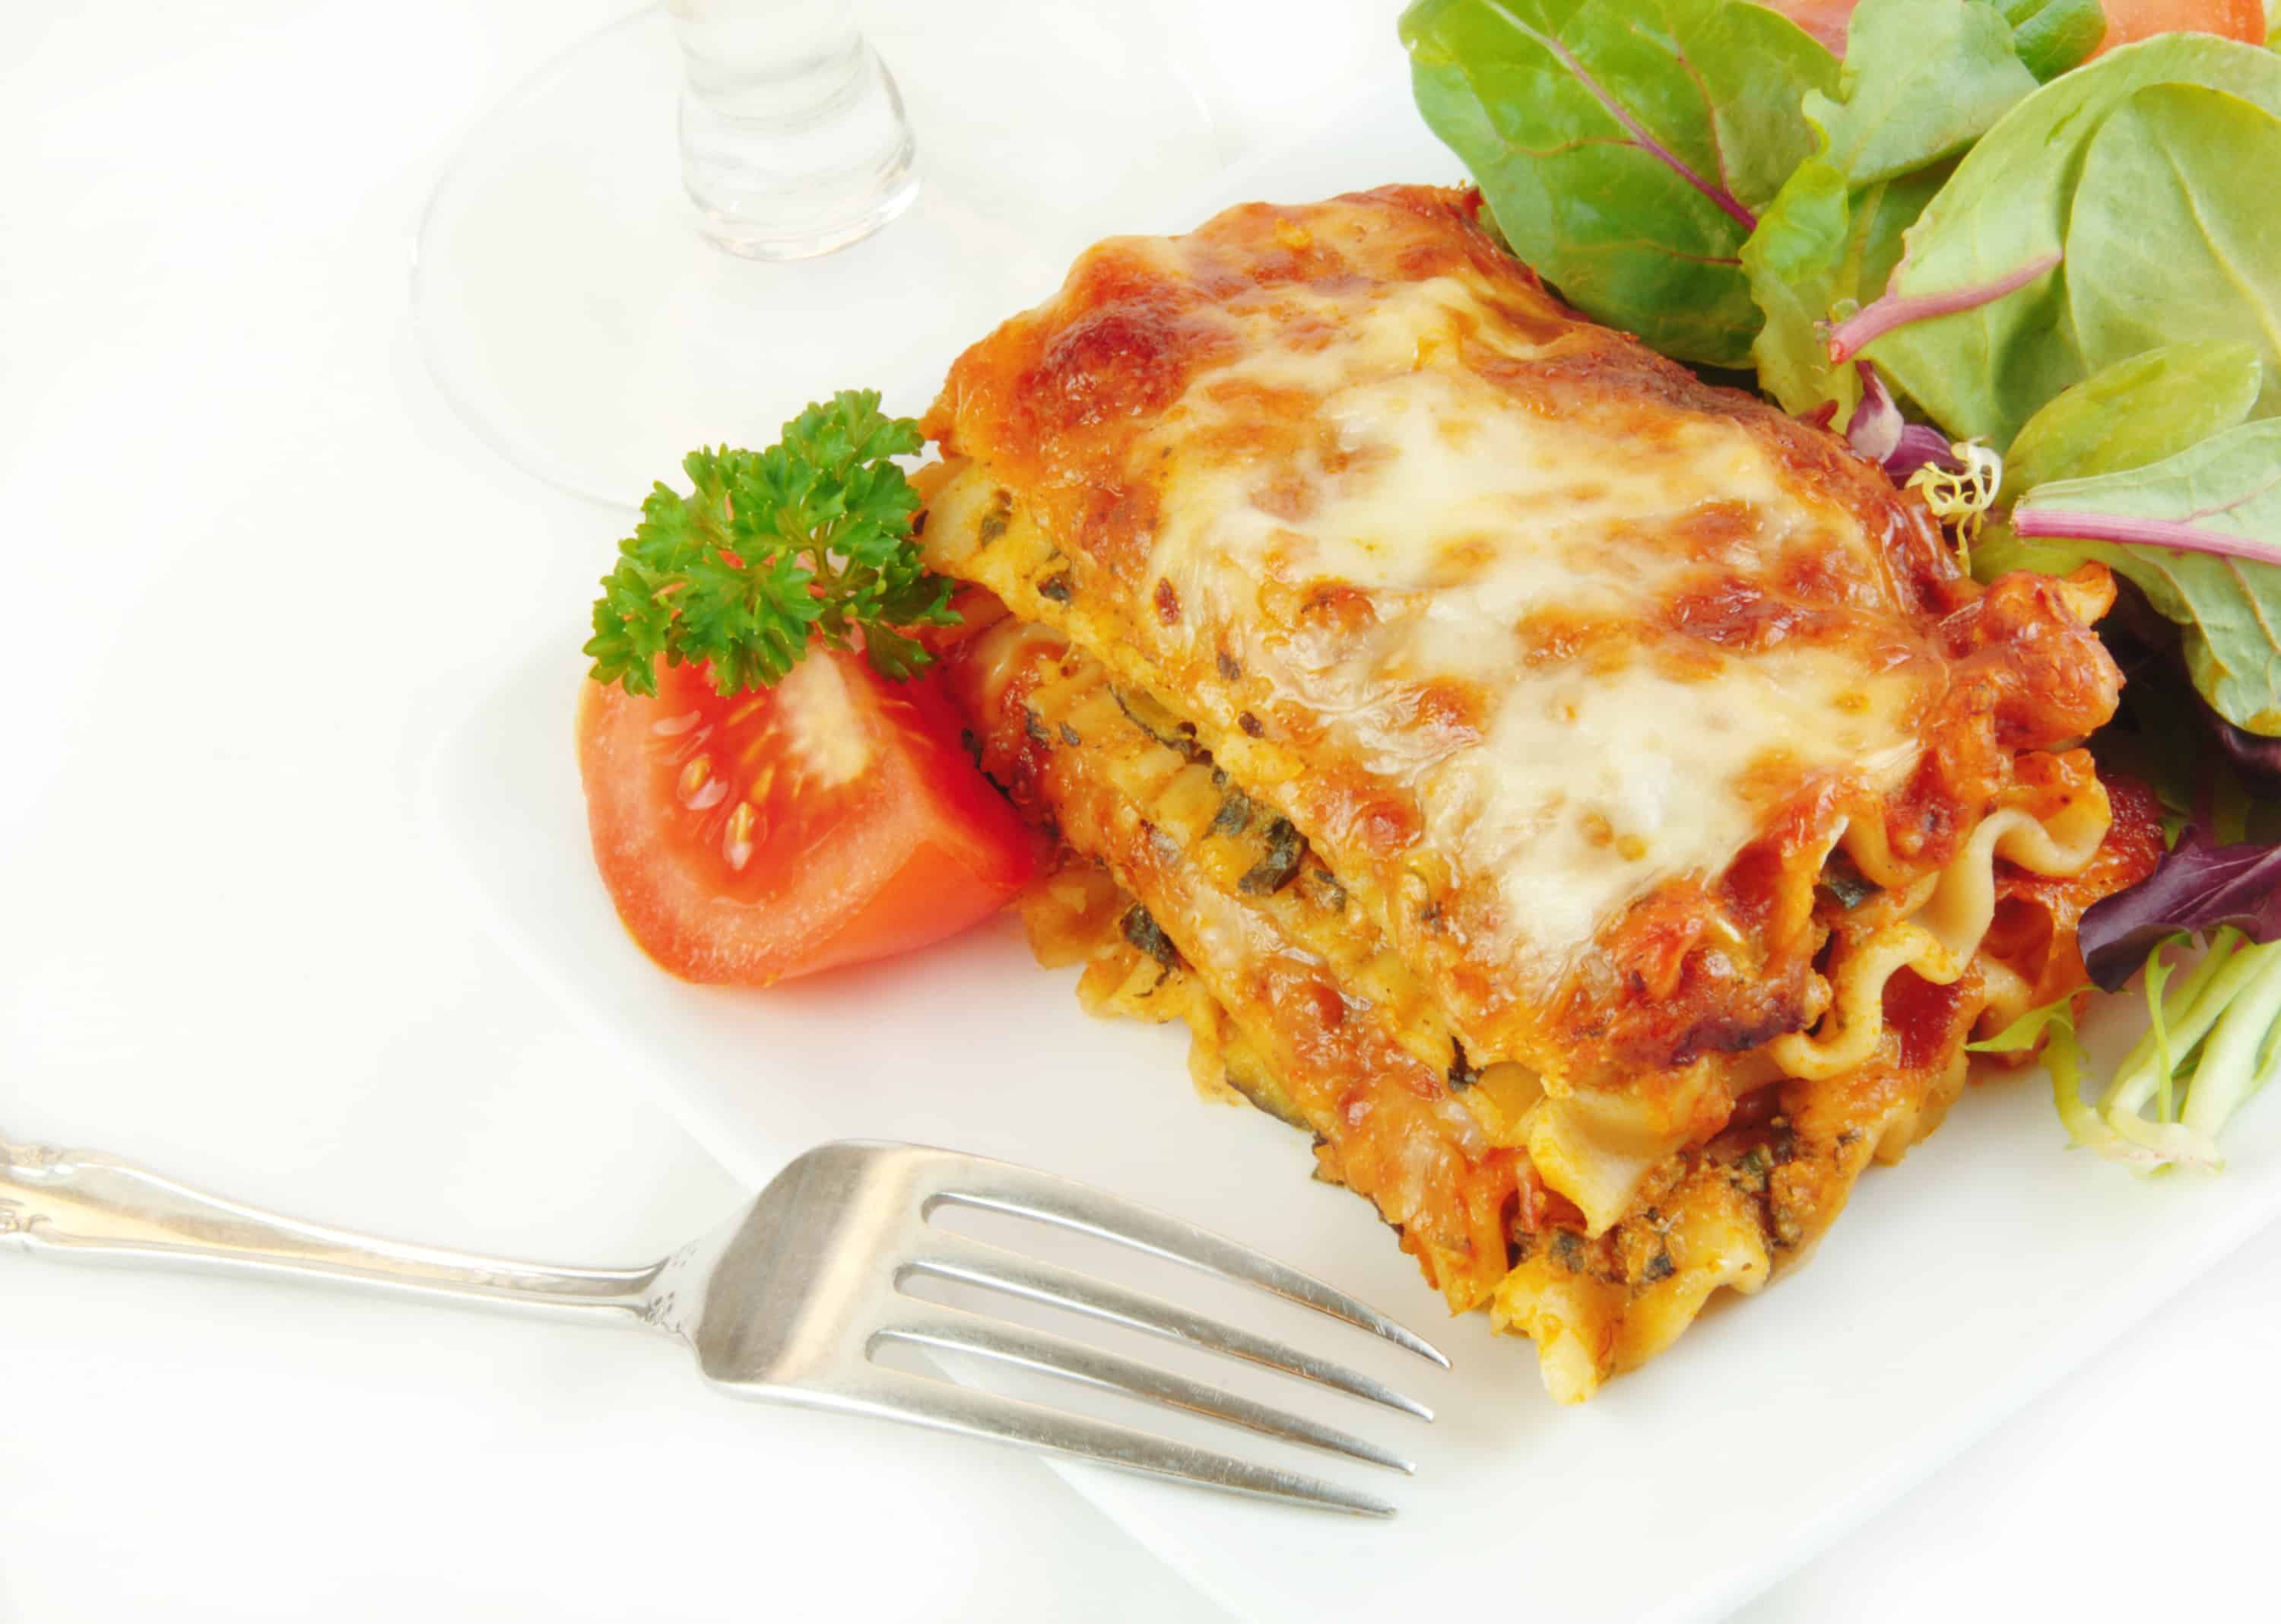 Our Crock Pot lasagna recipe takes the work out of making lasagna while keeping this favorite dish amazing. Grab the recipe on Made in a Pinch, and follow us on Pinterest for more easy family recipes and helpful tips!